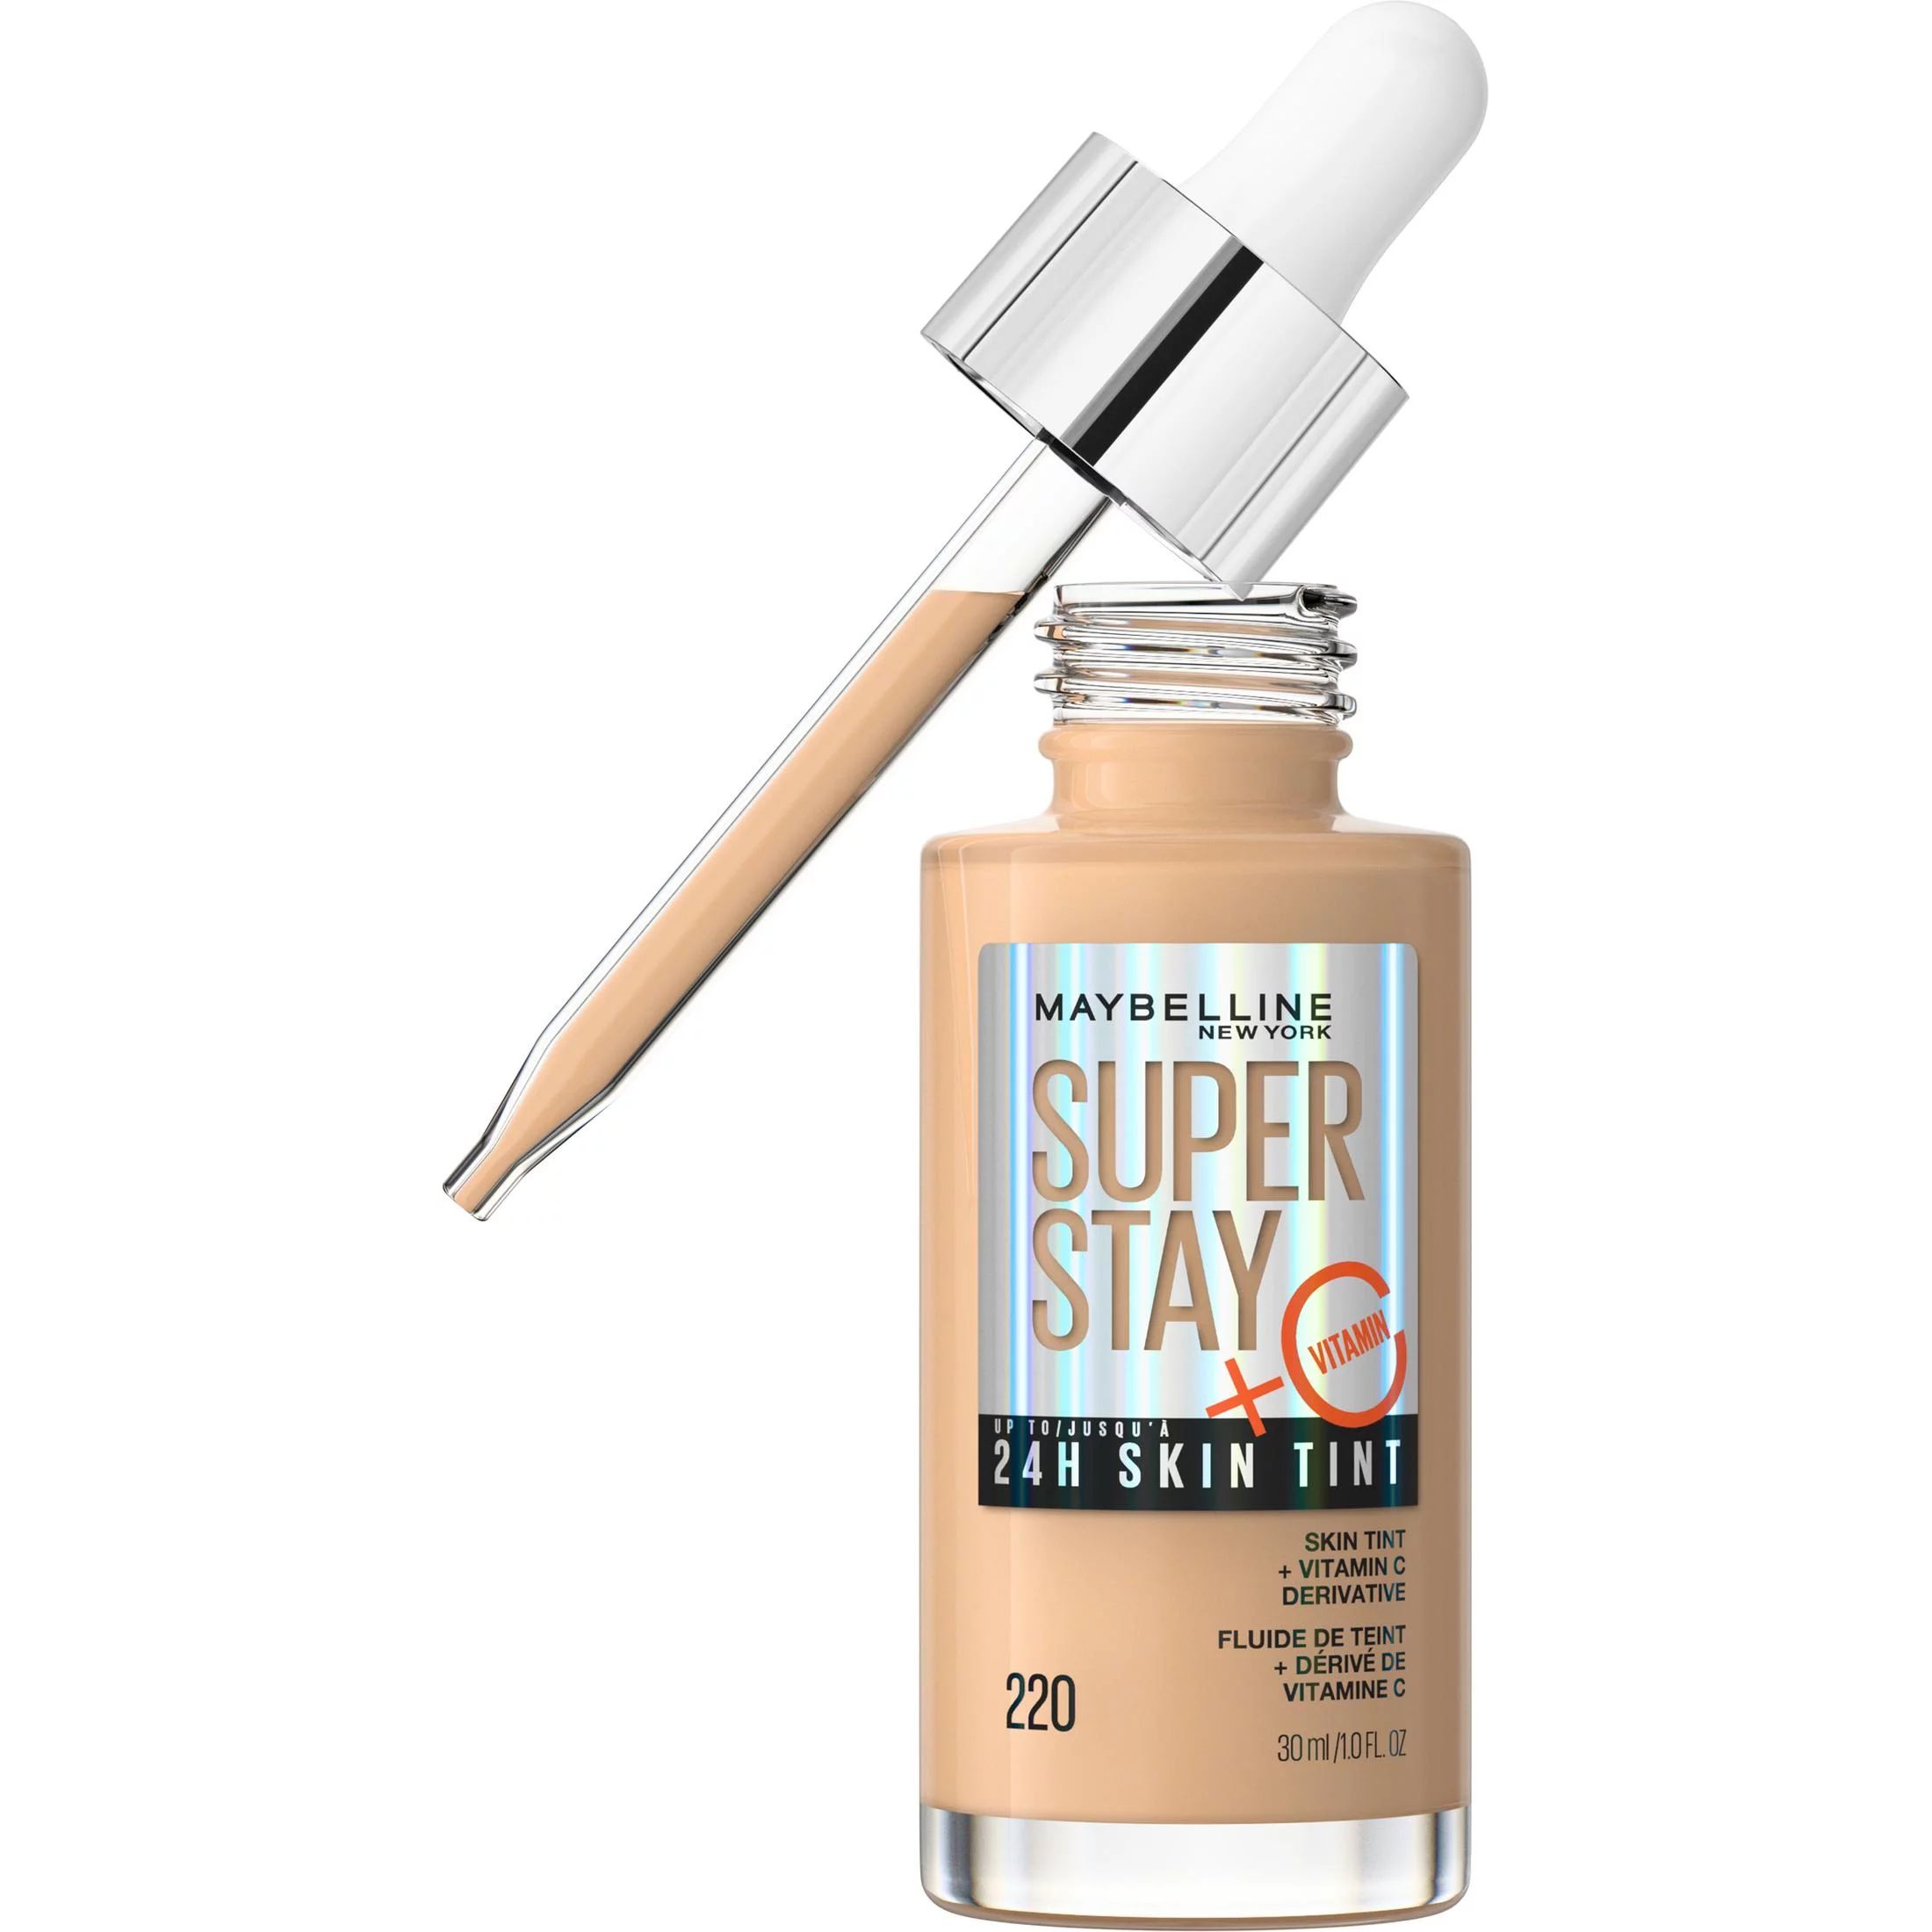 Maybelline Super Stay Super Stay Up to 24HR Skin Tint with Vitamin C, 220, 1 fl oz | Walmart (US)